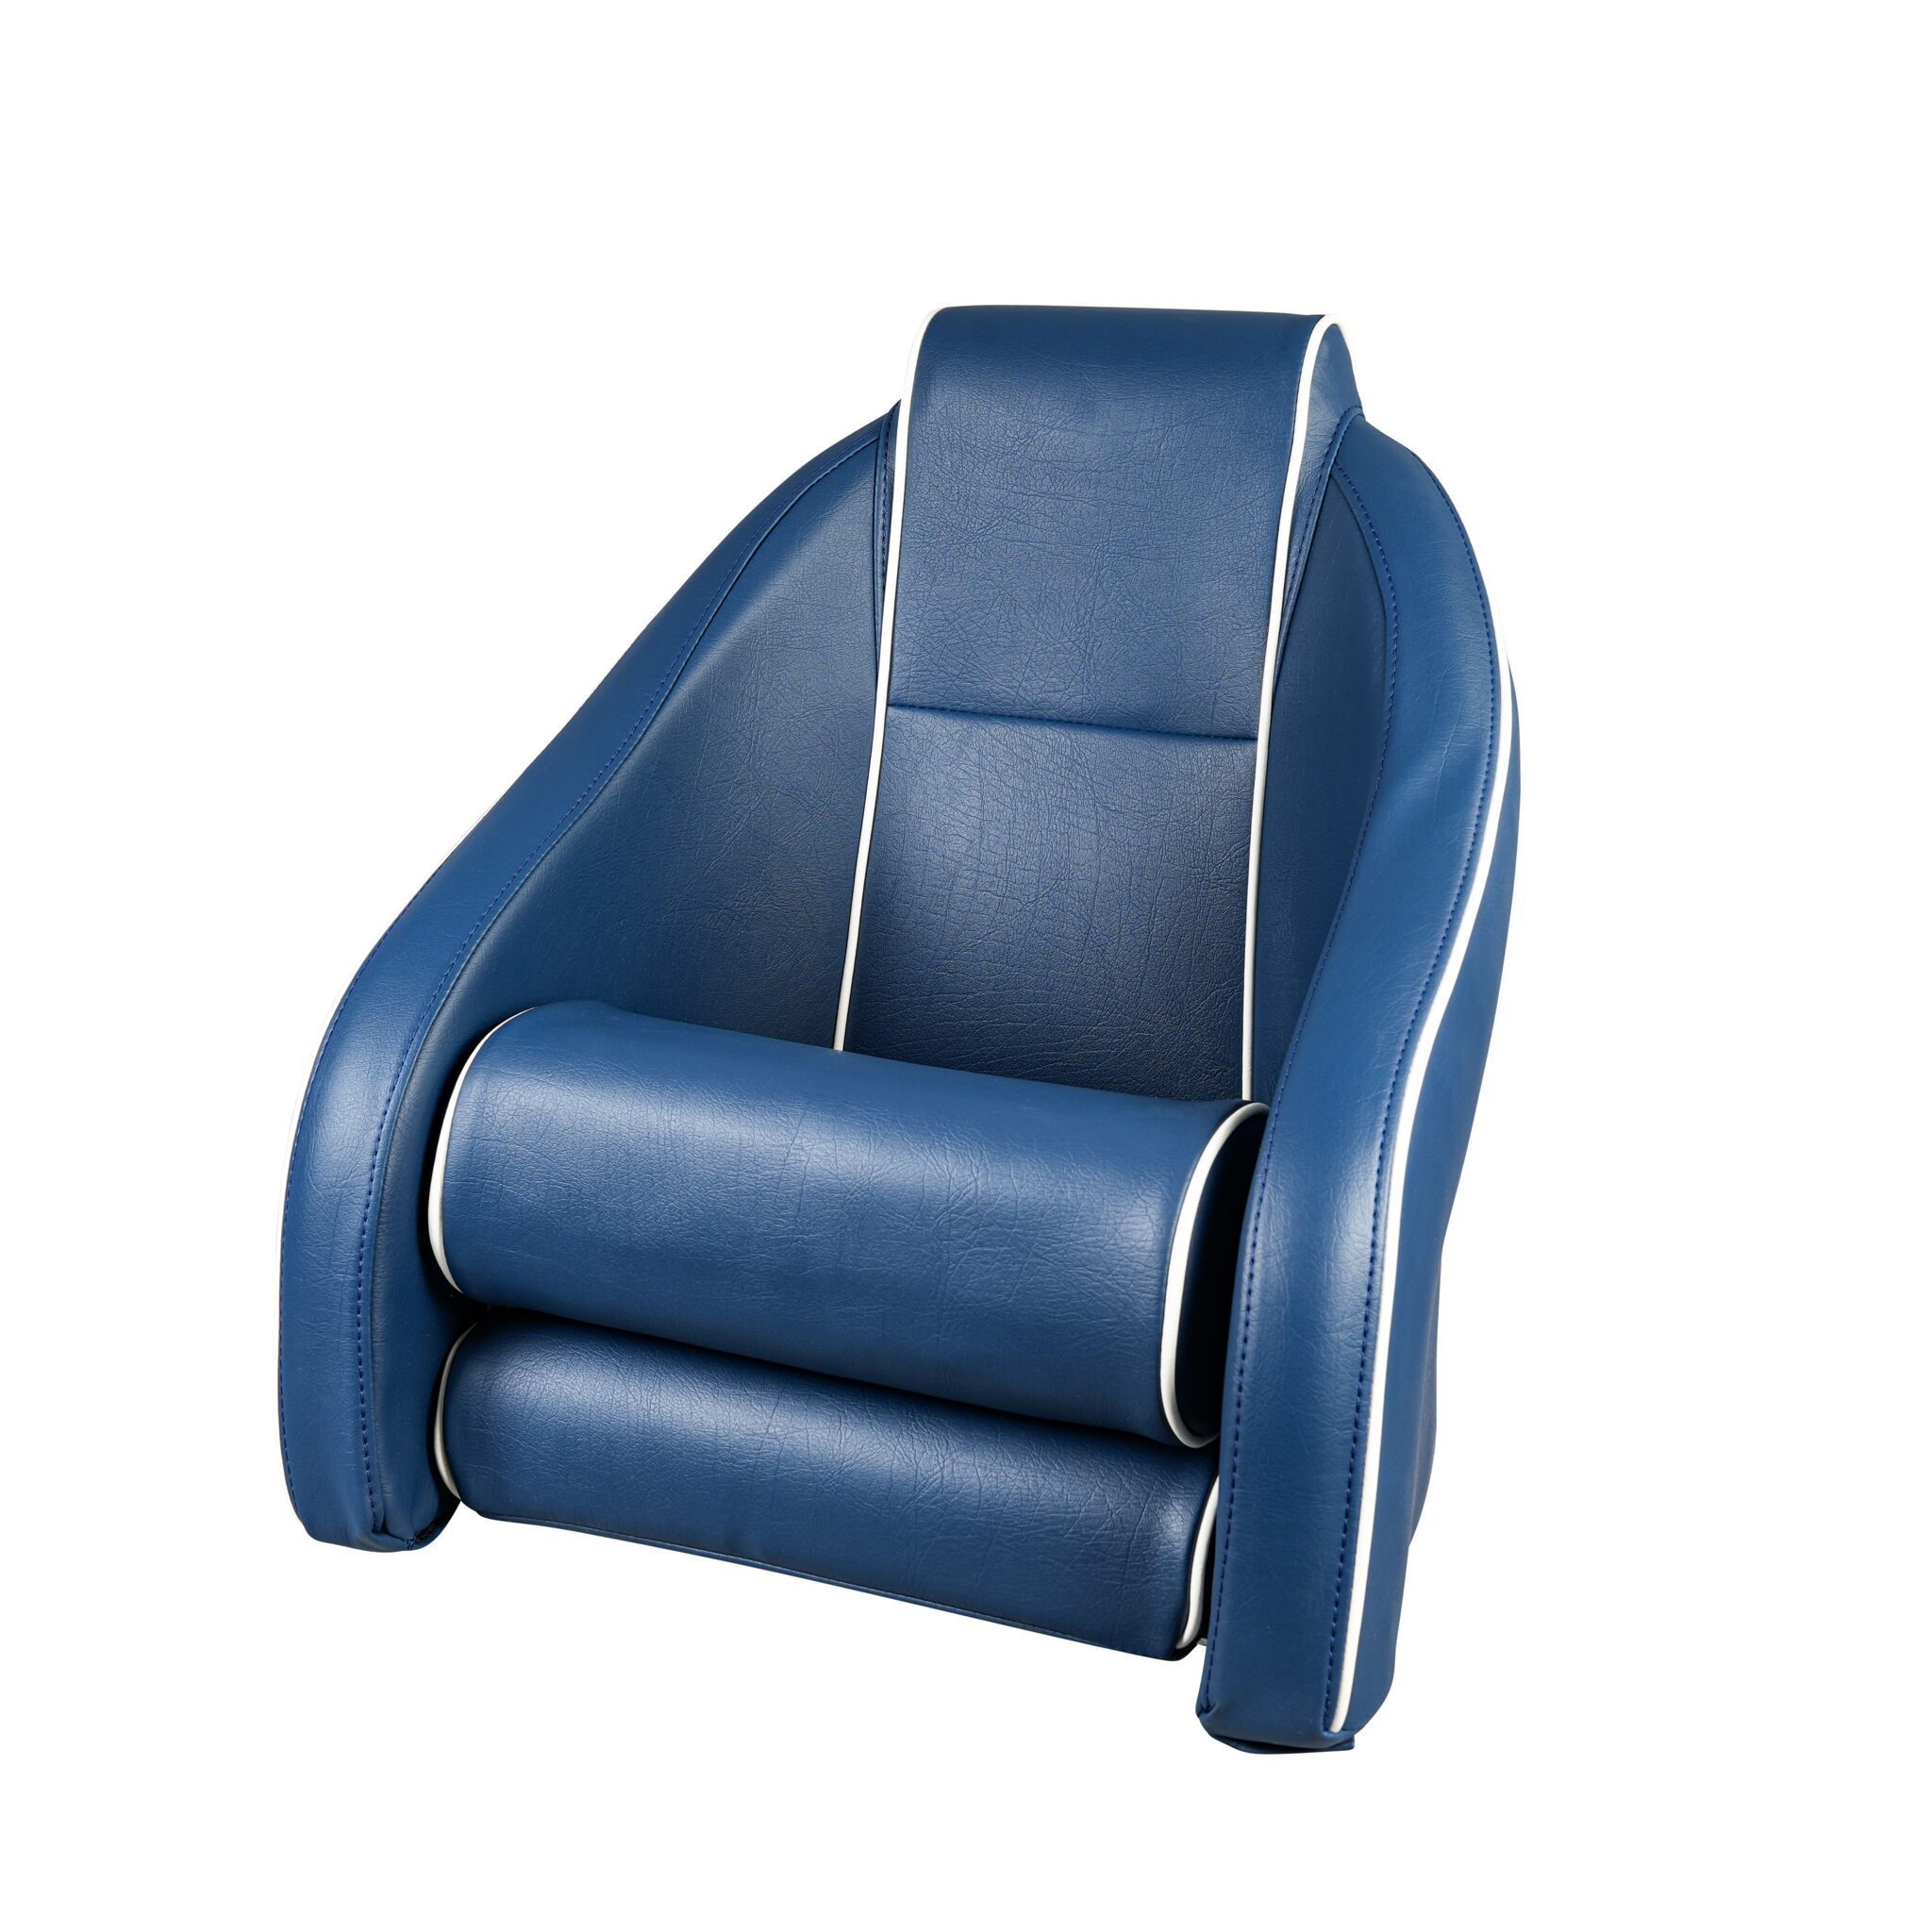 Blue Sea helm seat with neck support Porto